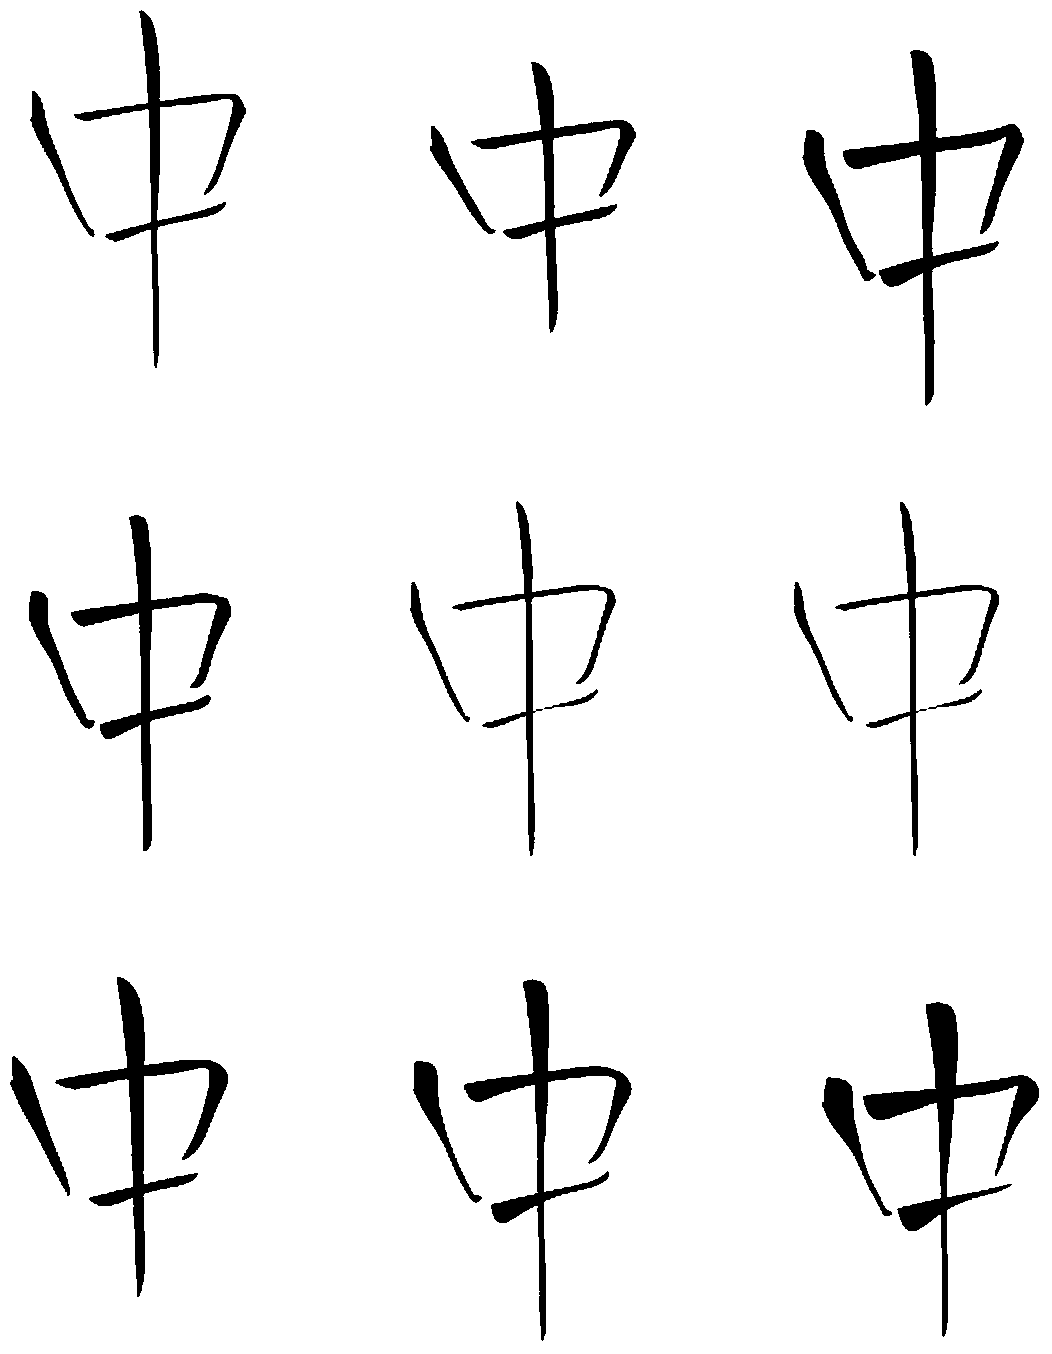 A Soft Pen Chinese Character Transformation Method Based on Writing Feature Editing